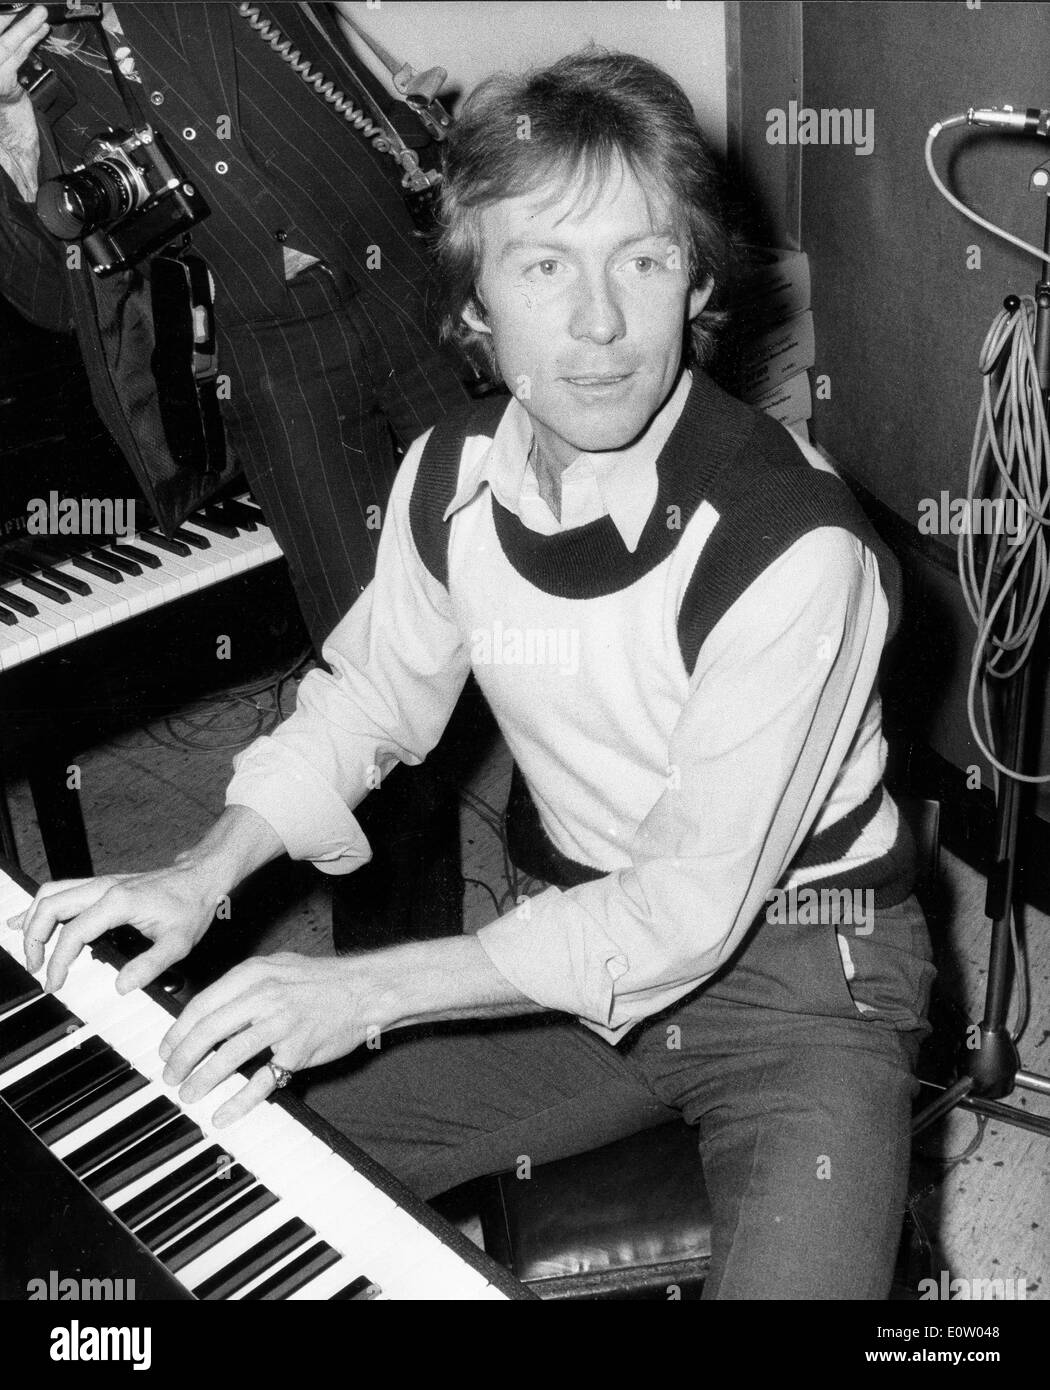 Roddy Llewellyn playing piano at the recording studio Stock Photo